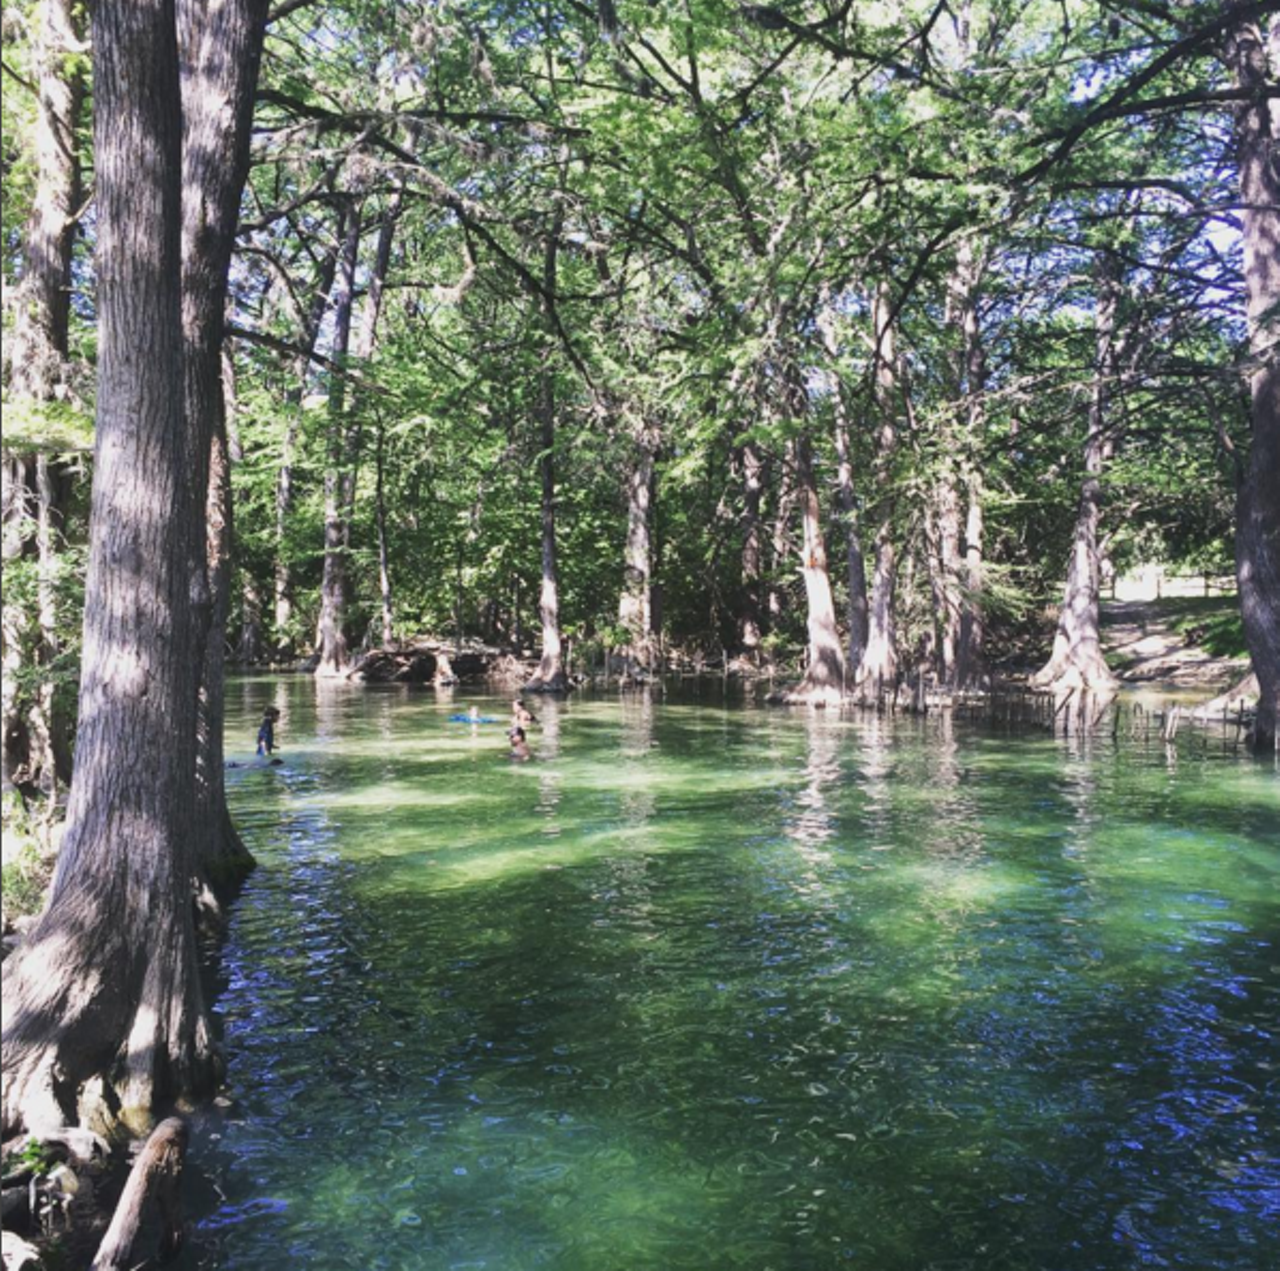 Wimberly Blue Hole
Blue Hole is an hour away and offers a peaceful swimming spot for folks looking to cool off. 
Photo via Instagram/lulunono